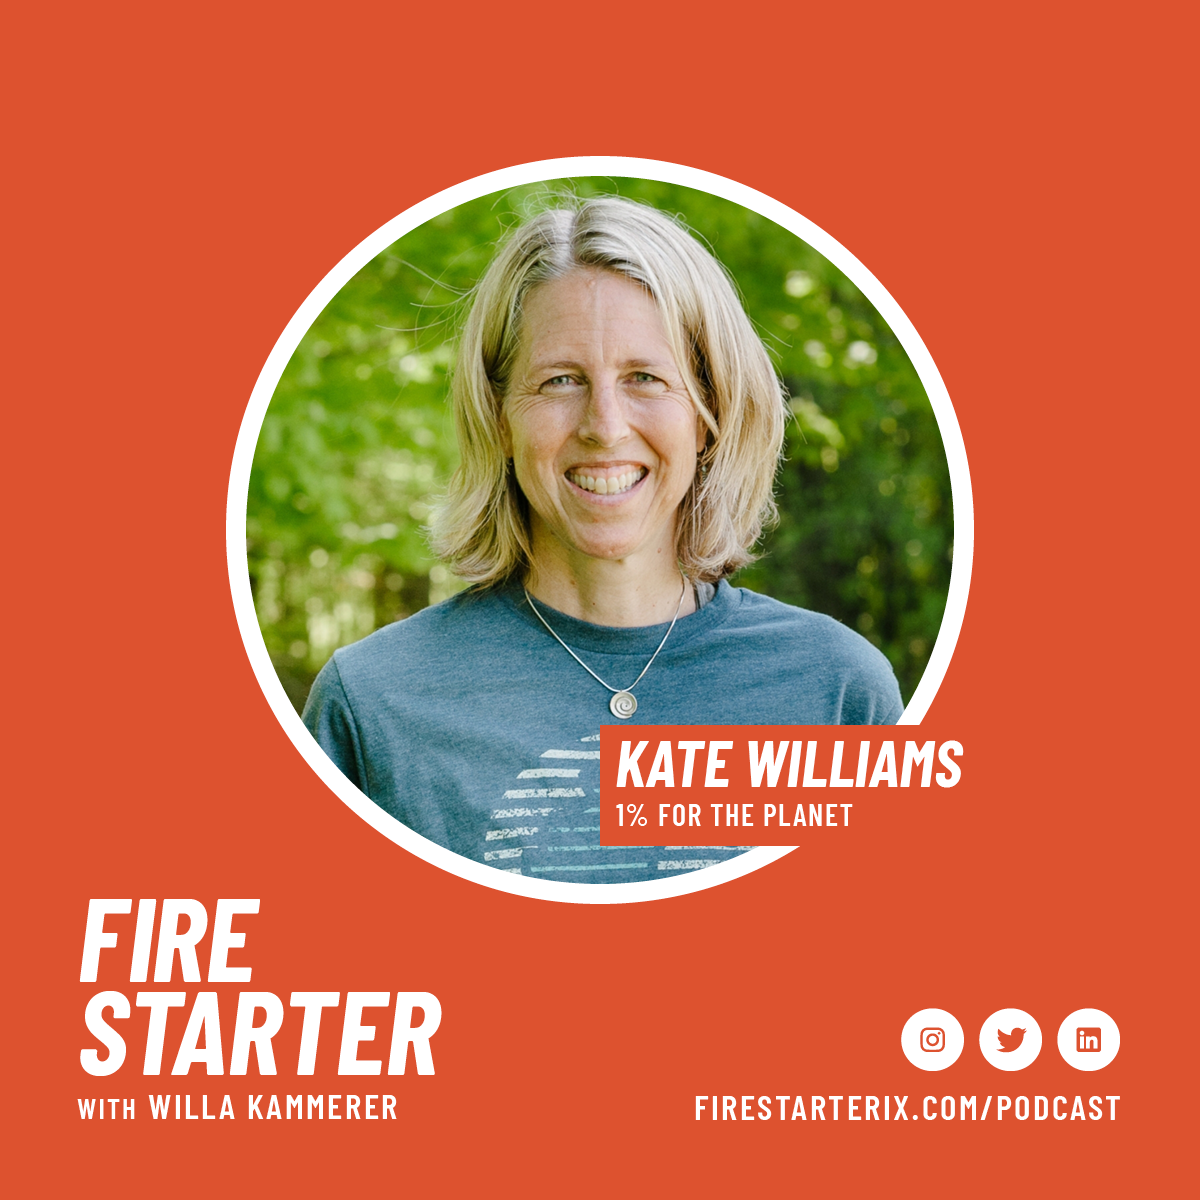 Kate Williams 1% for the Planet